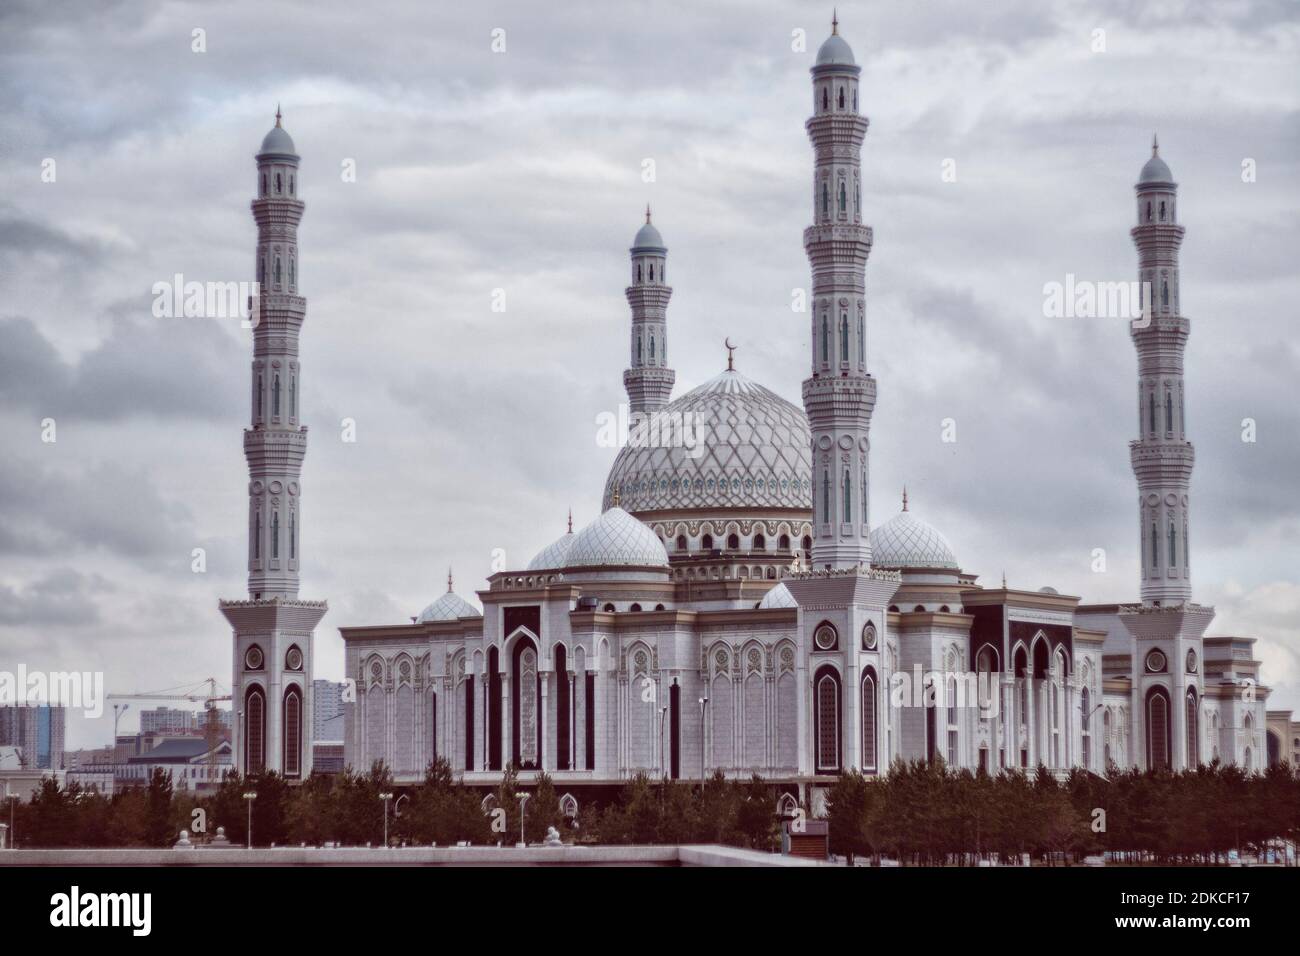 Nur-Sultan, Astana Kazakhstan - September 30, 2019: The Hazrat Sultan Mosque in Nur-Sultan, Kazakhstan. It is the largest mosque in Central Asia. Stock Photo